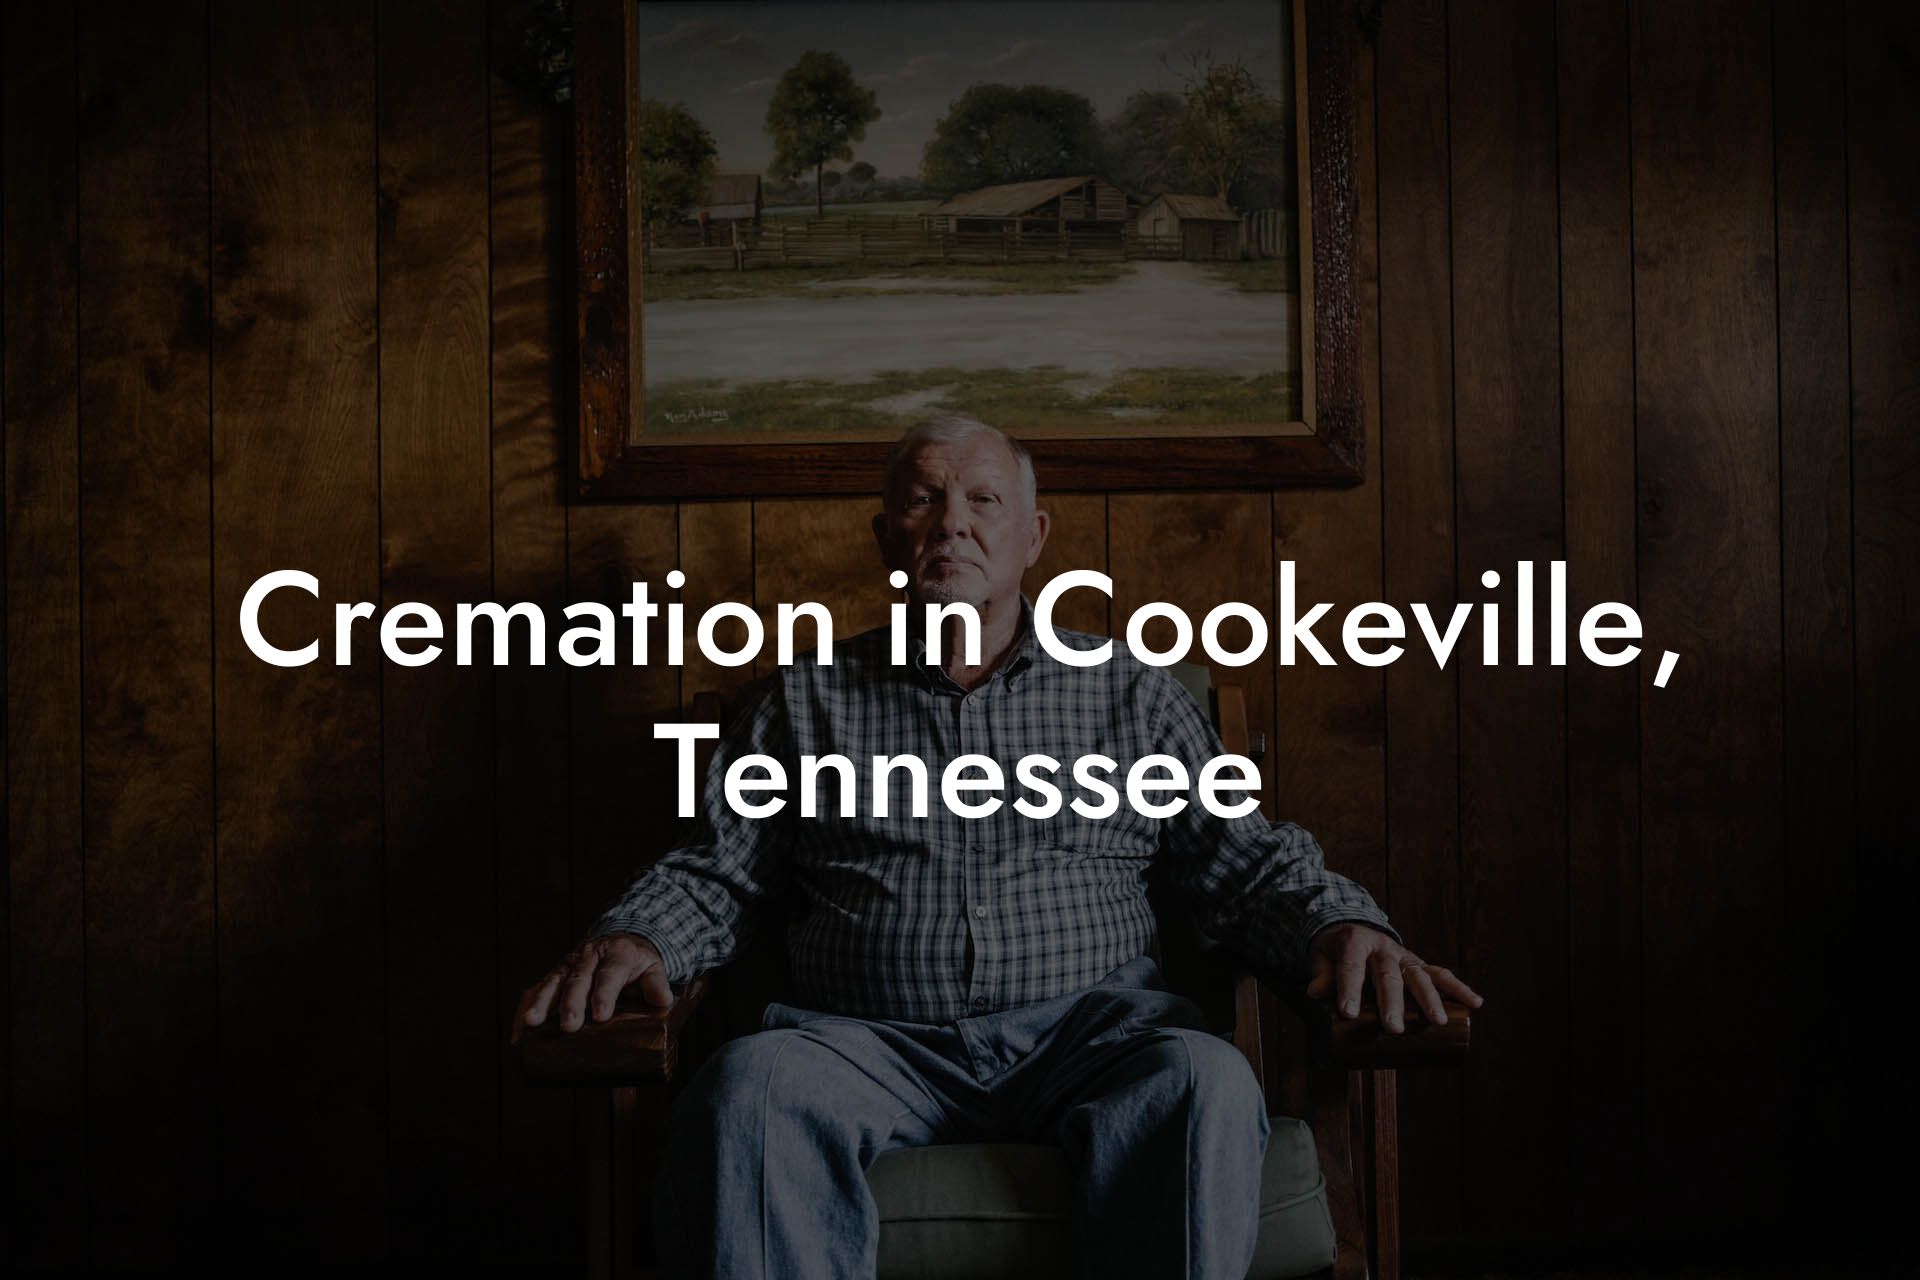 Cremation in Cookeville, Tennessee